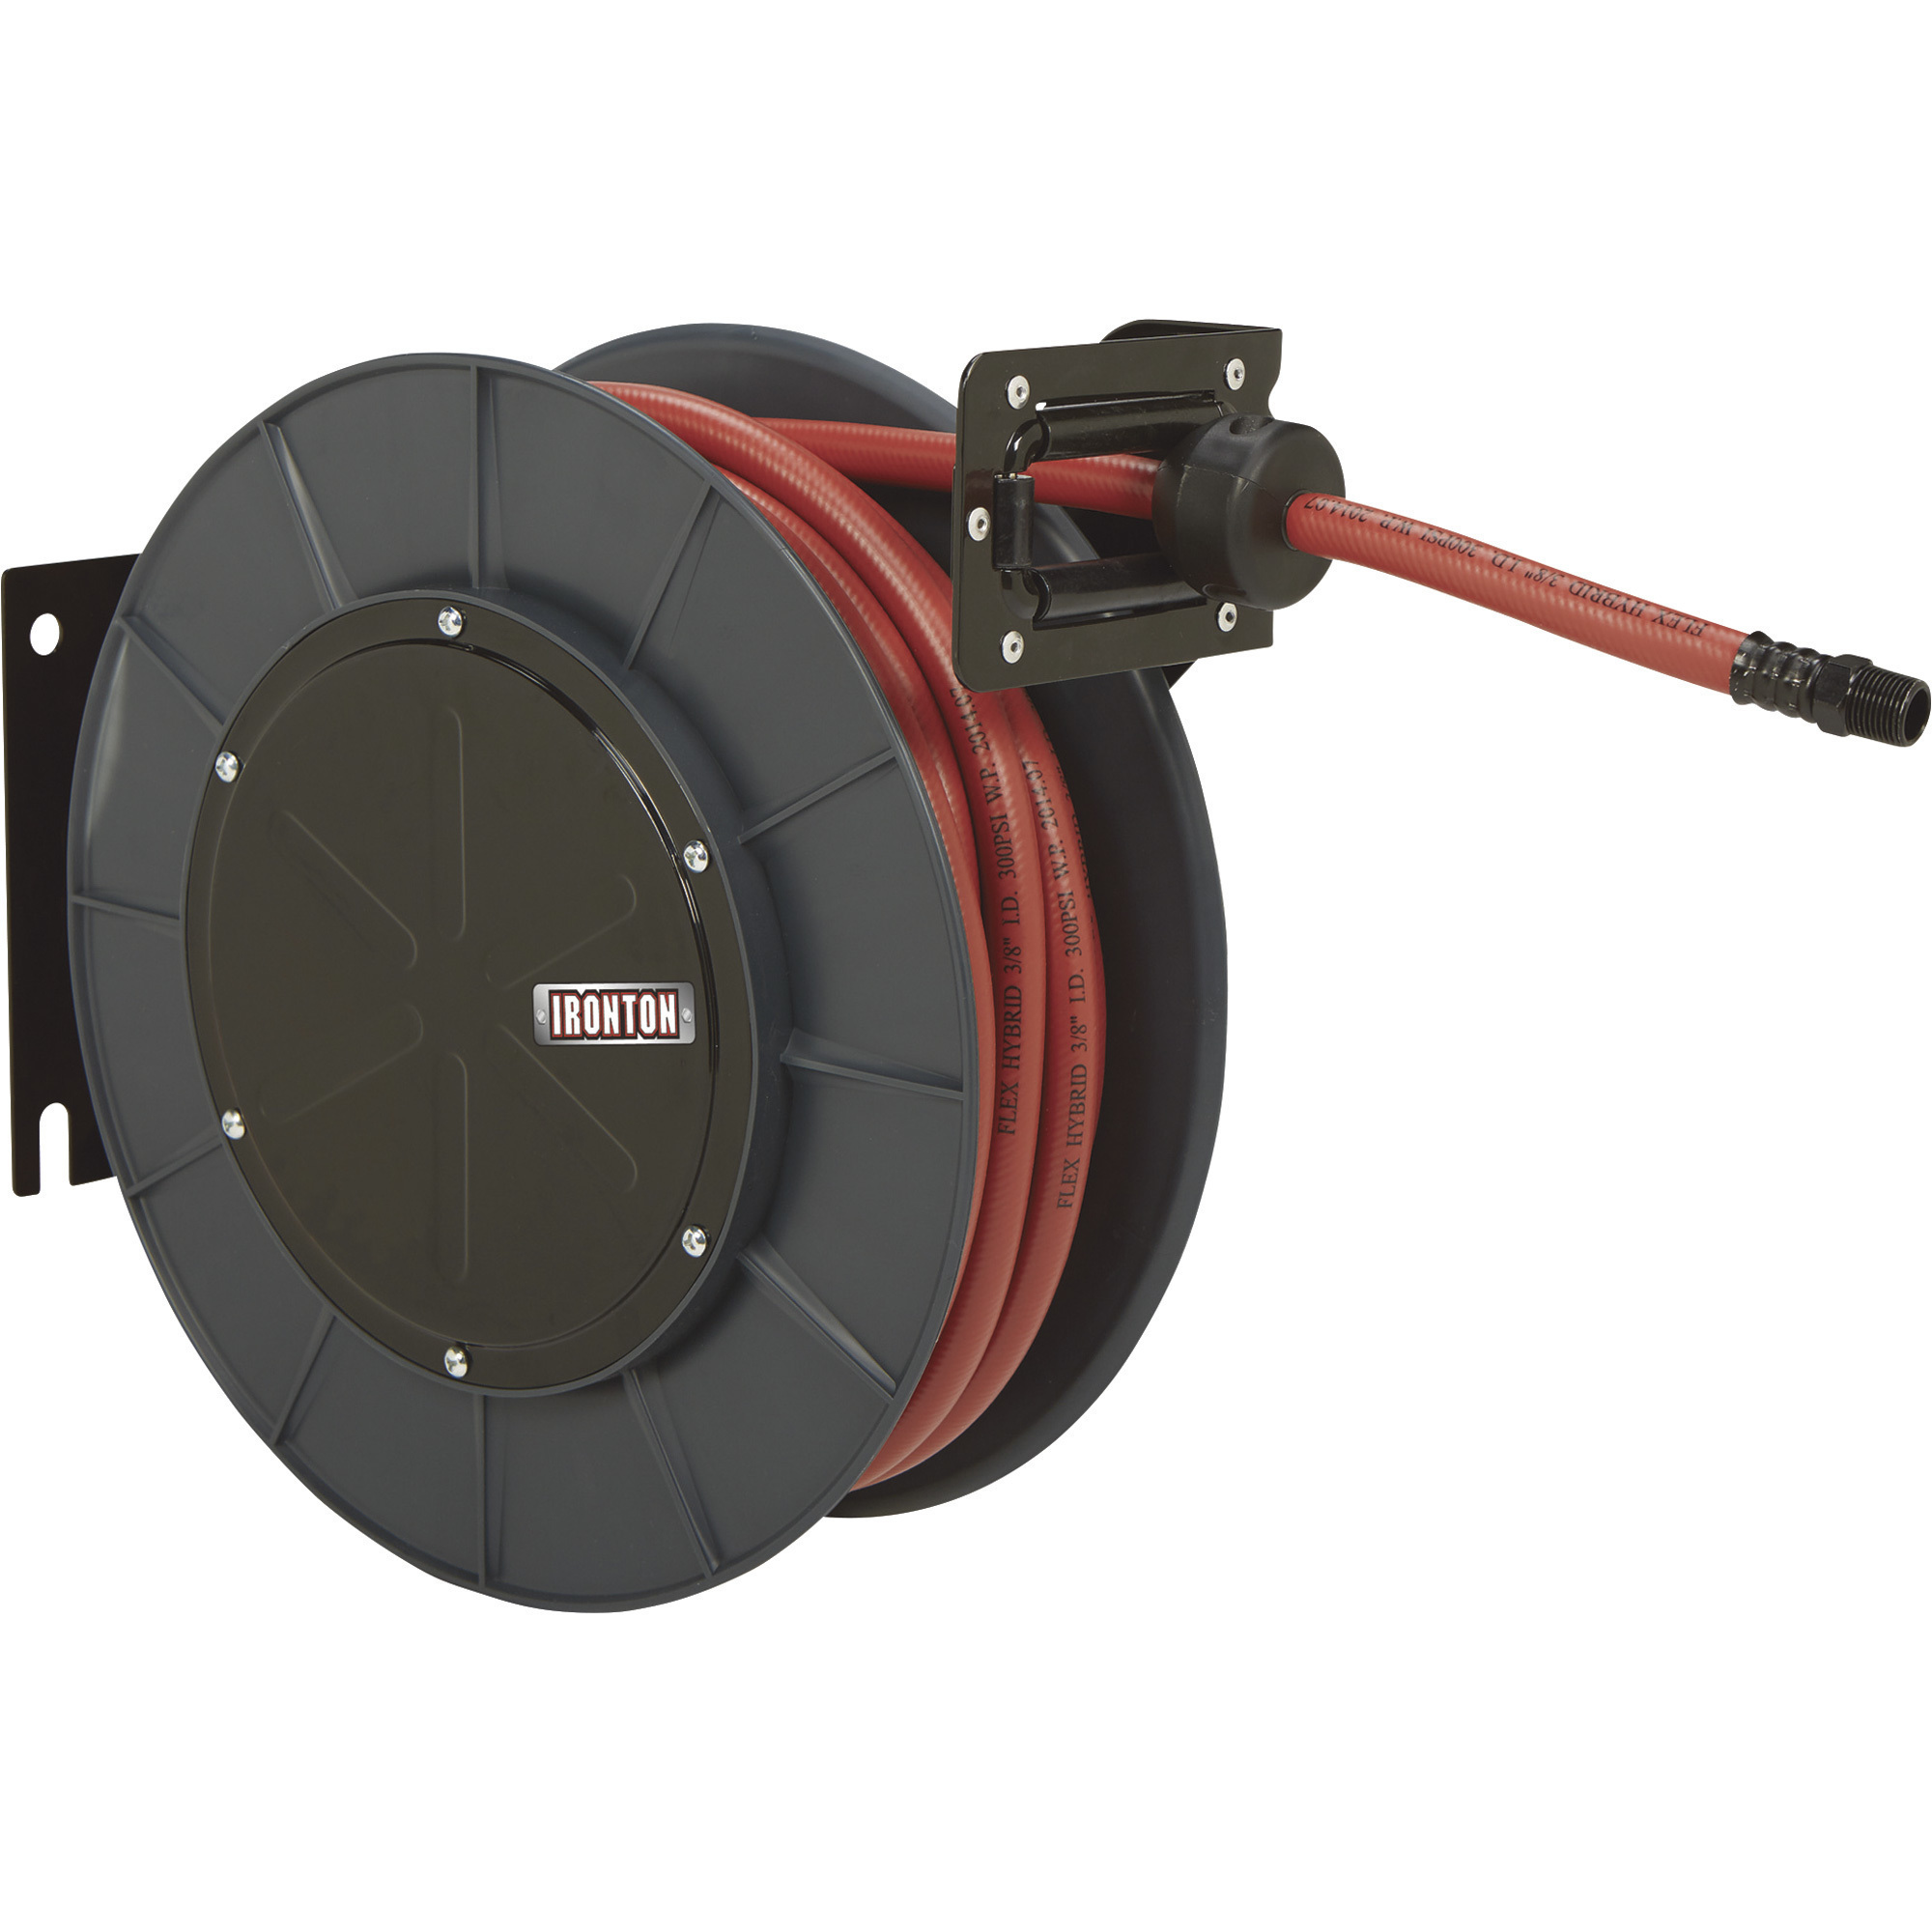 Ironton Auto-Rewind Air Hose Reel, with 3/8in. x 50ft. Hybrid Polymer Hose,  Max. 300 PSI